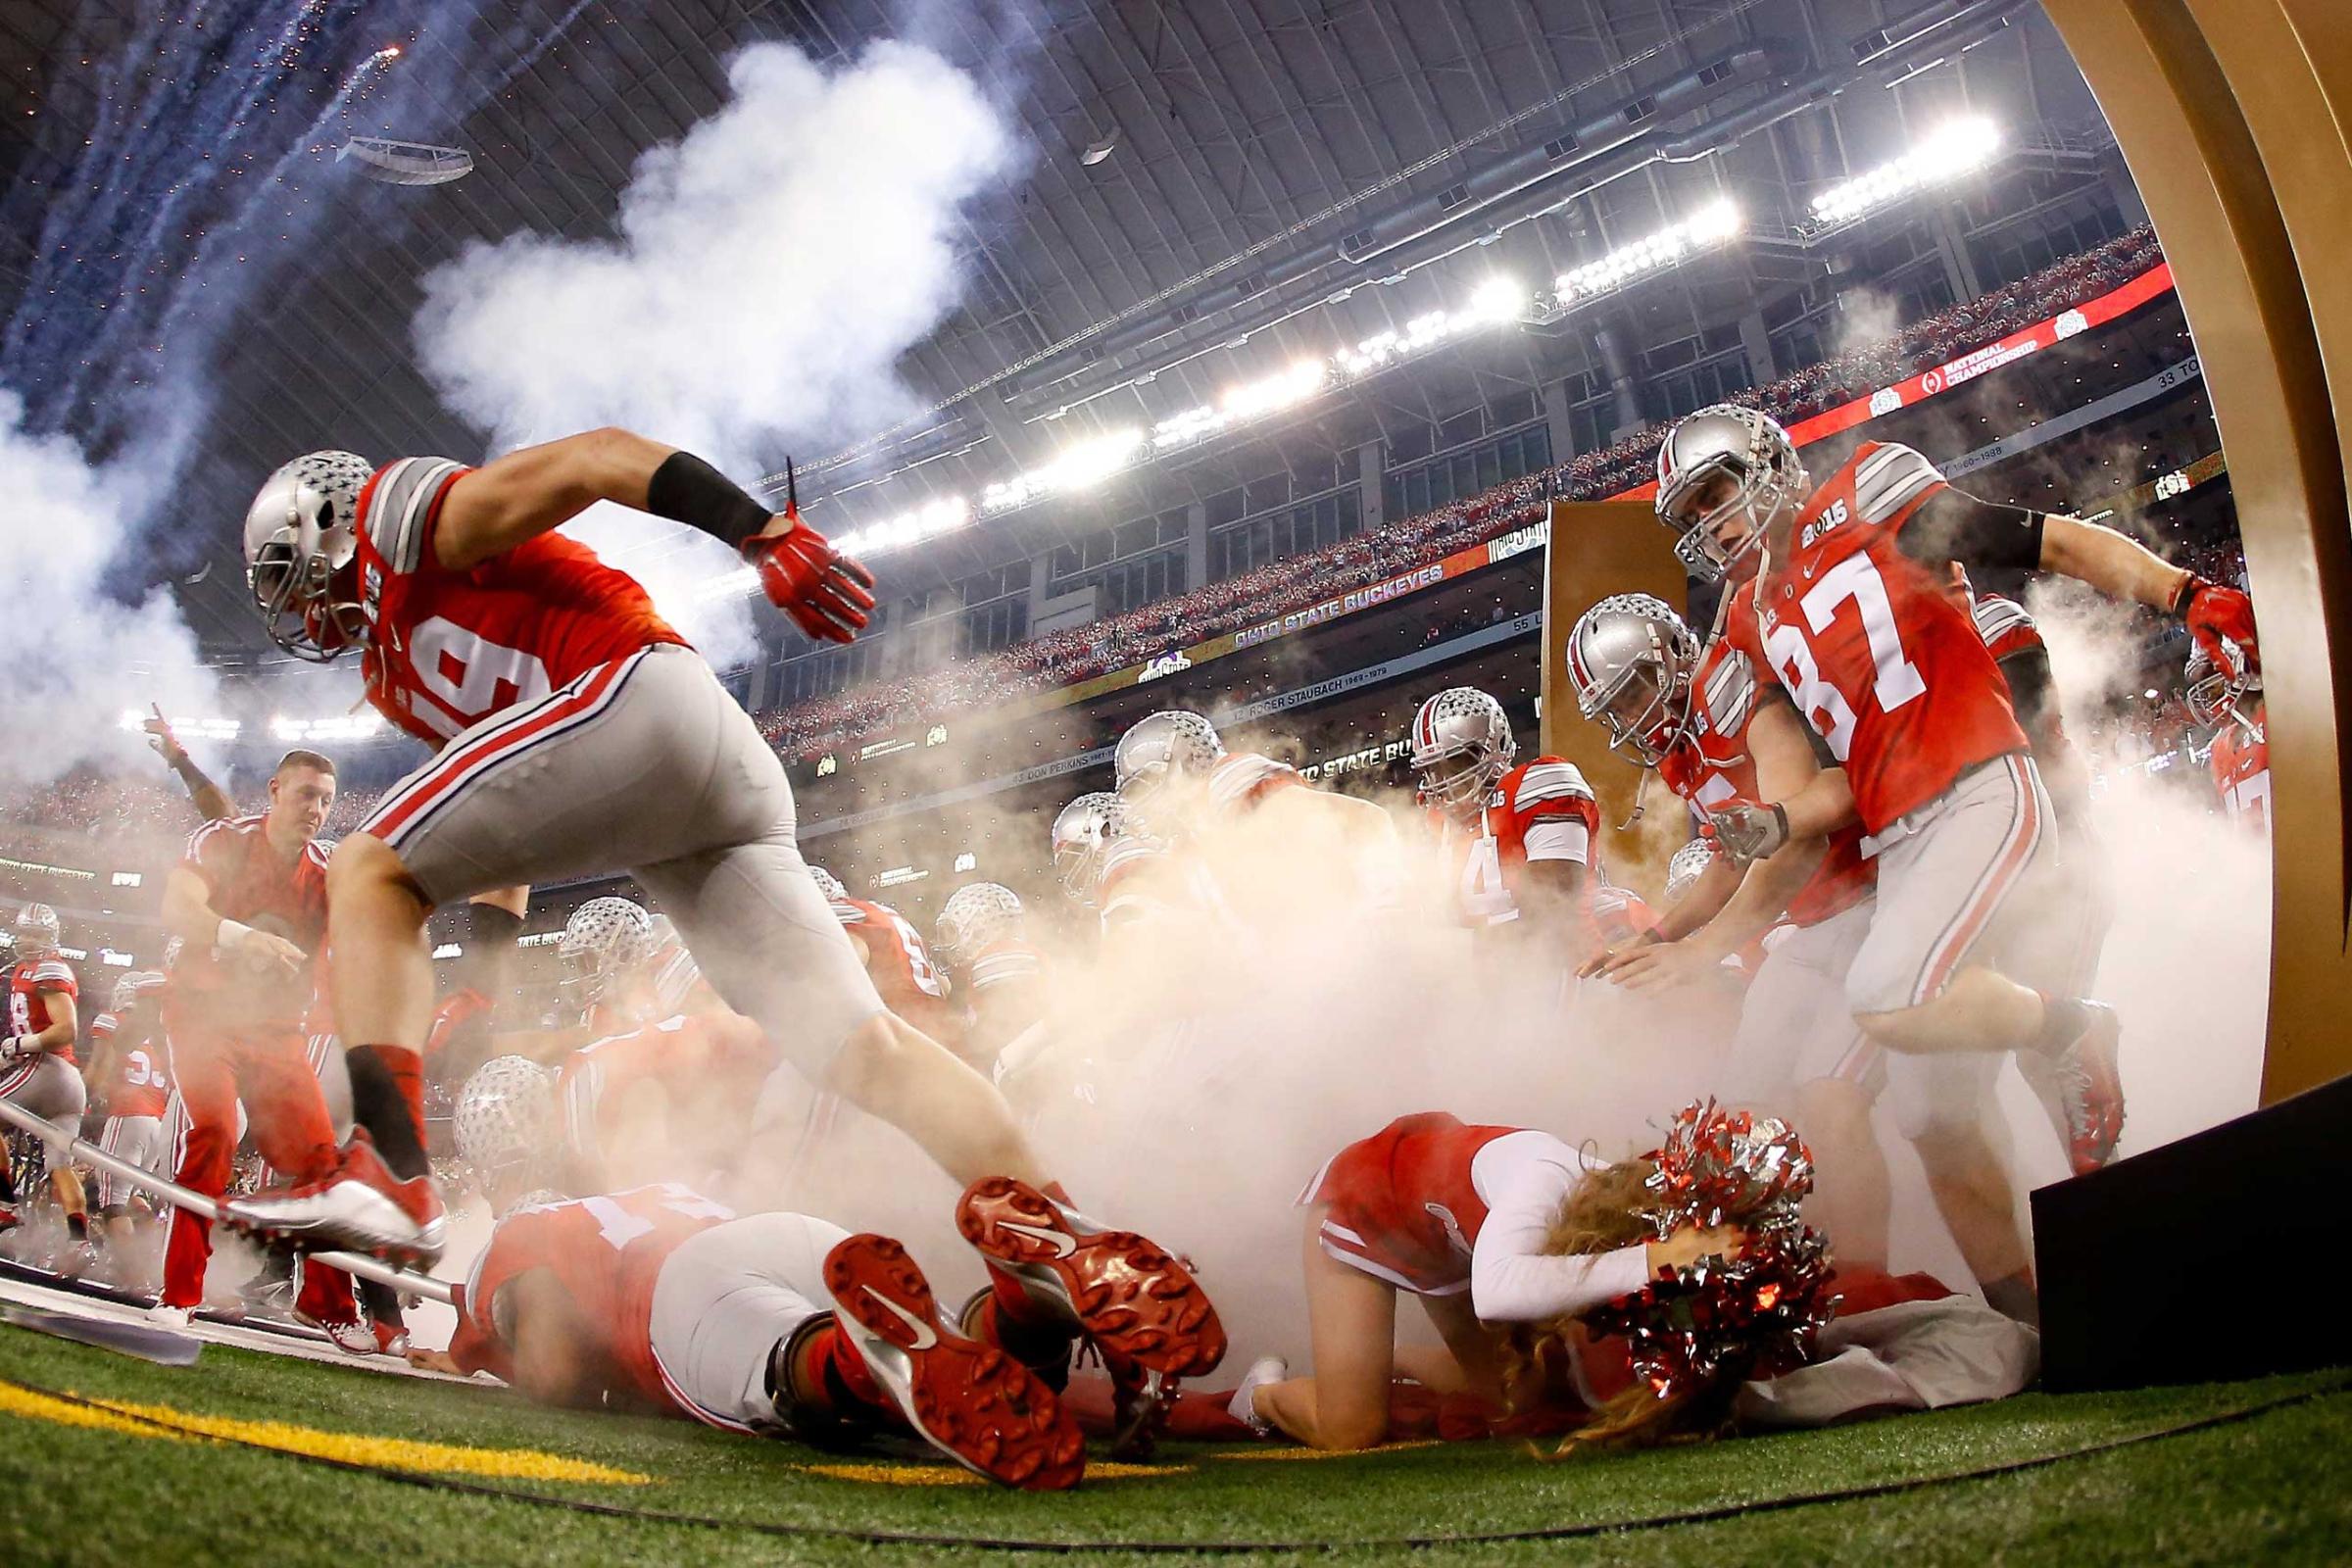 An Ohio State Buckeyes cheerleader falls as the Buckeyes run out to the field before the College Football Playoff National Championship Game at AT&T Stadium on Jan. 12, 2015 in Arlington, Texas.